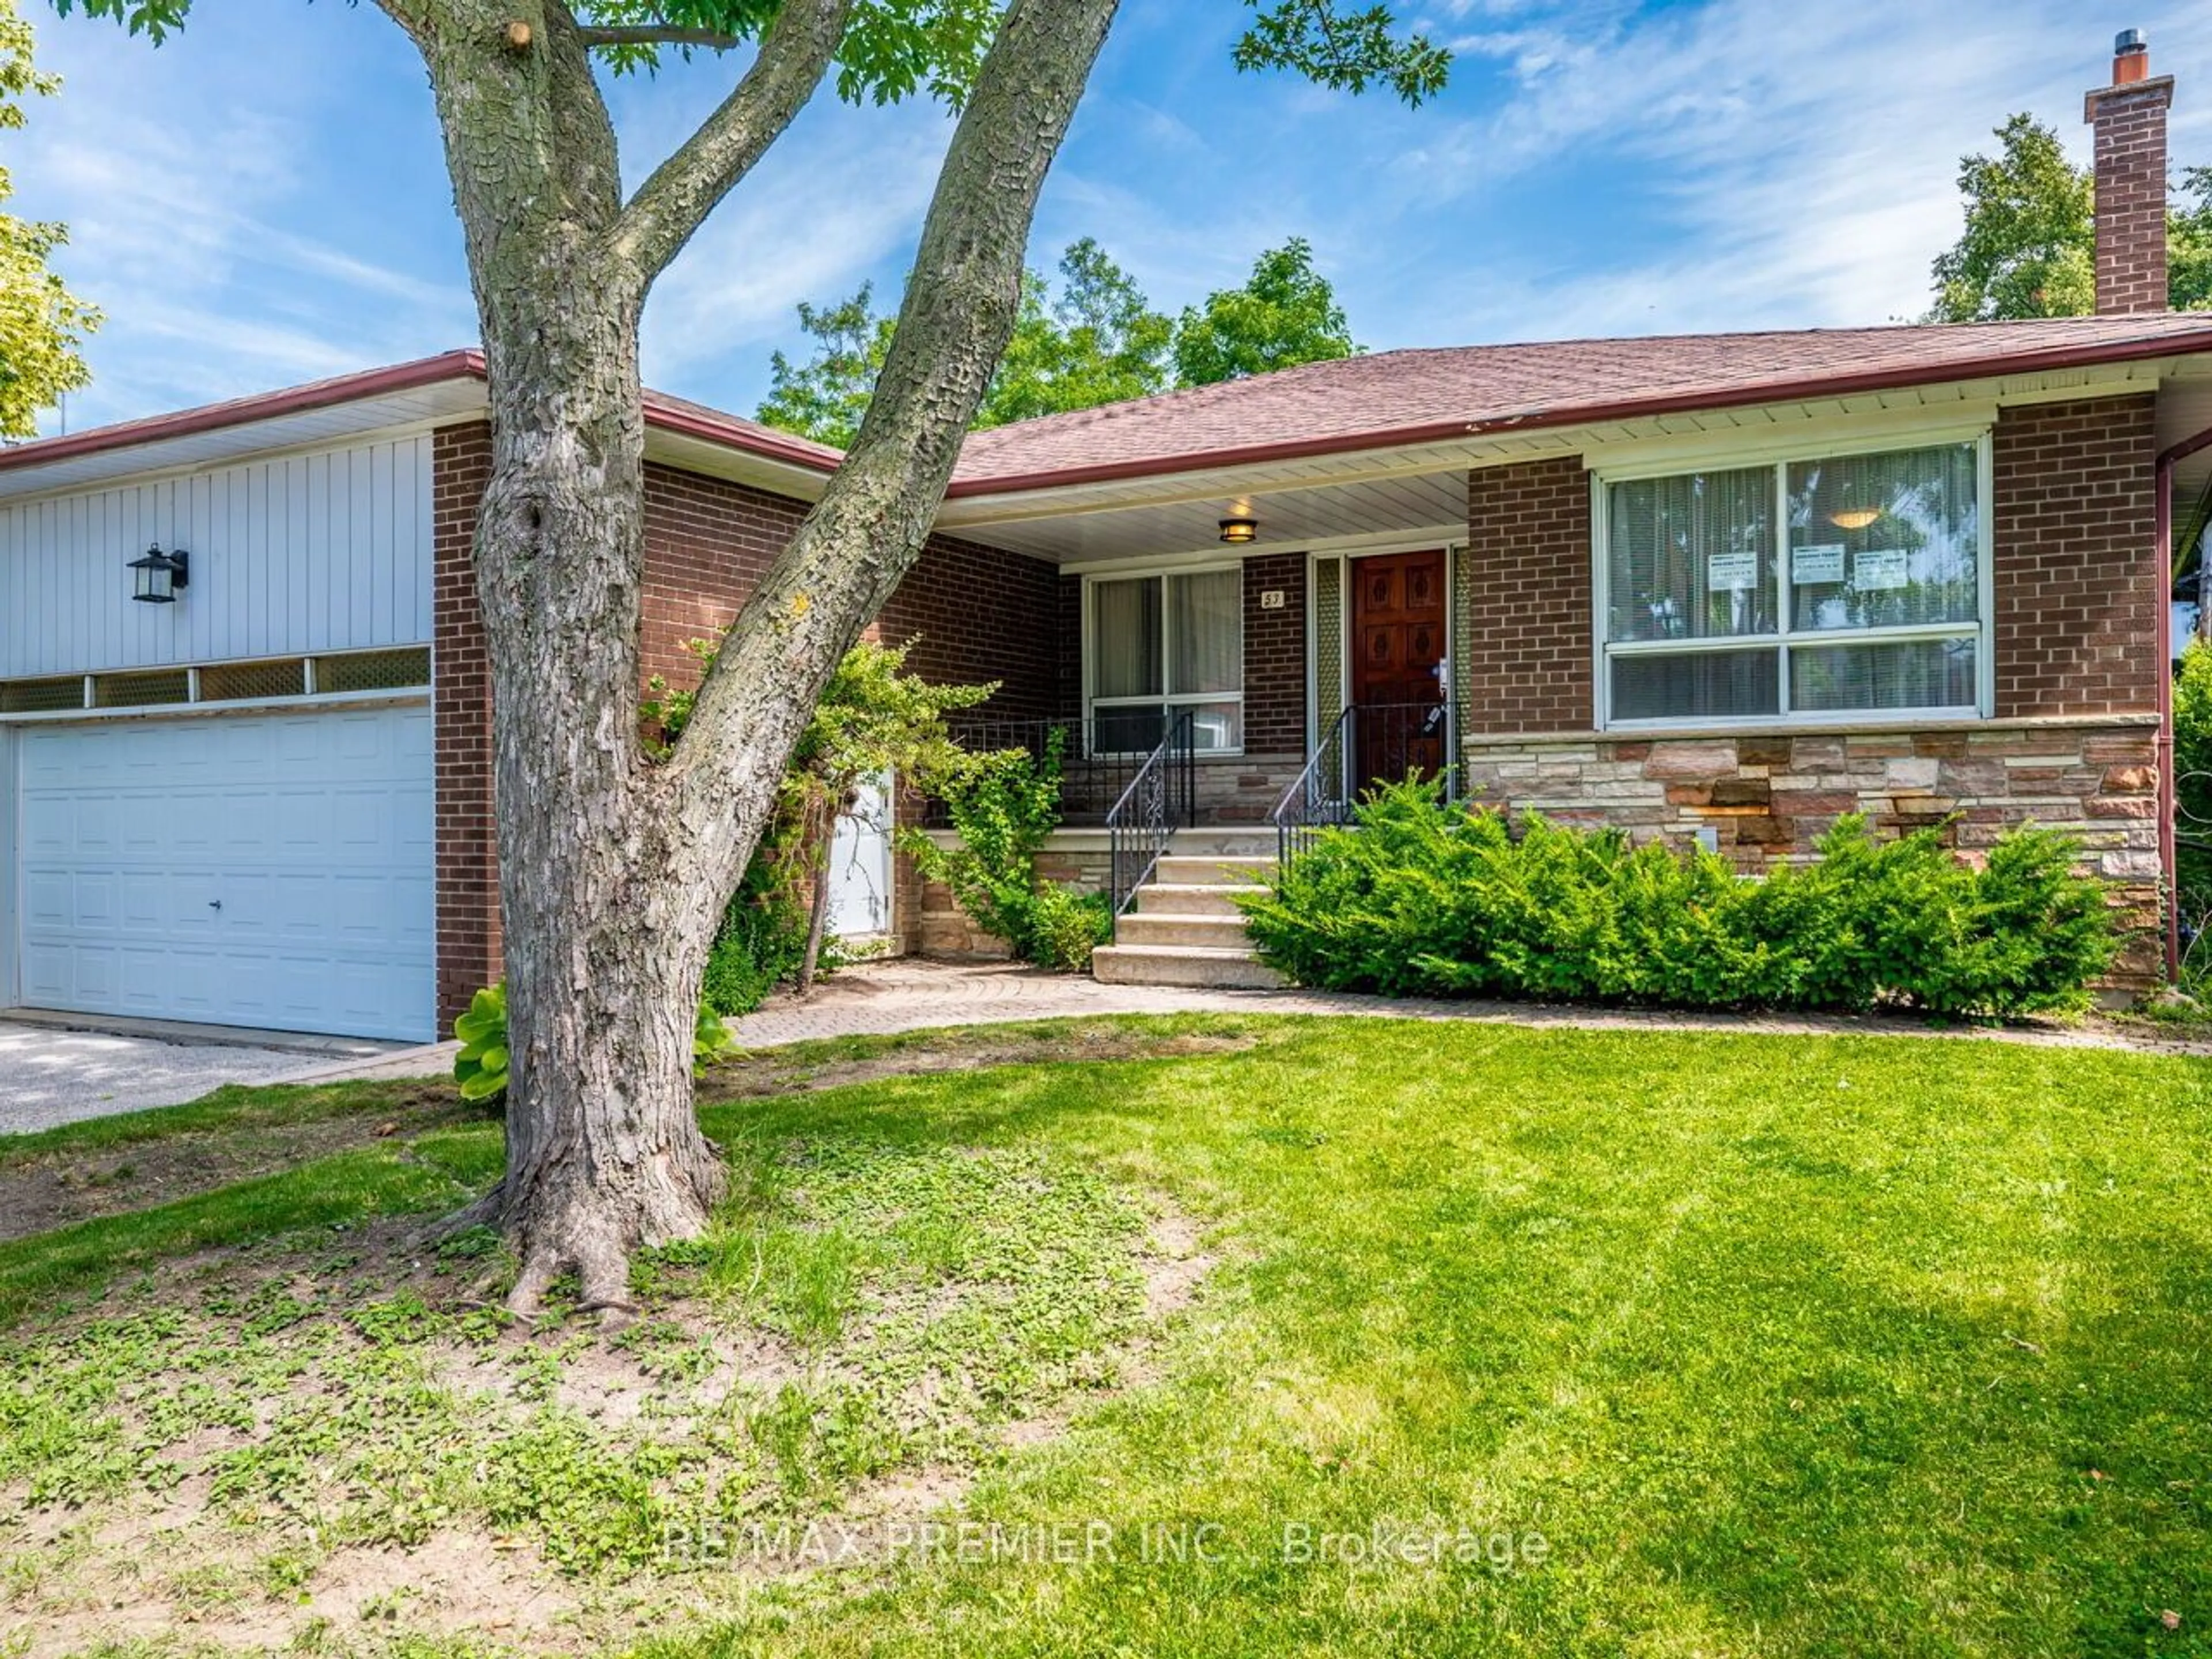 Frontside or backside of a home for 53 Thicket Rd, Toronto Ontario M9C 2T4